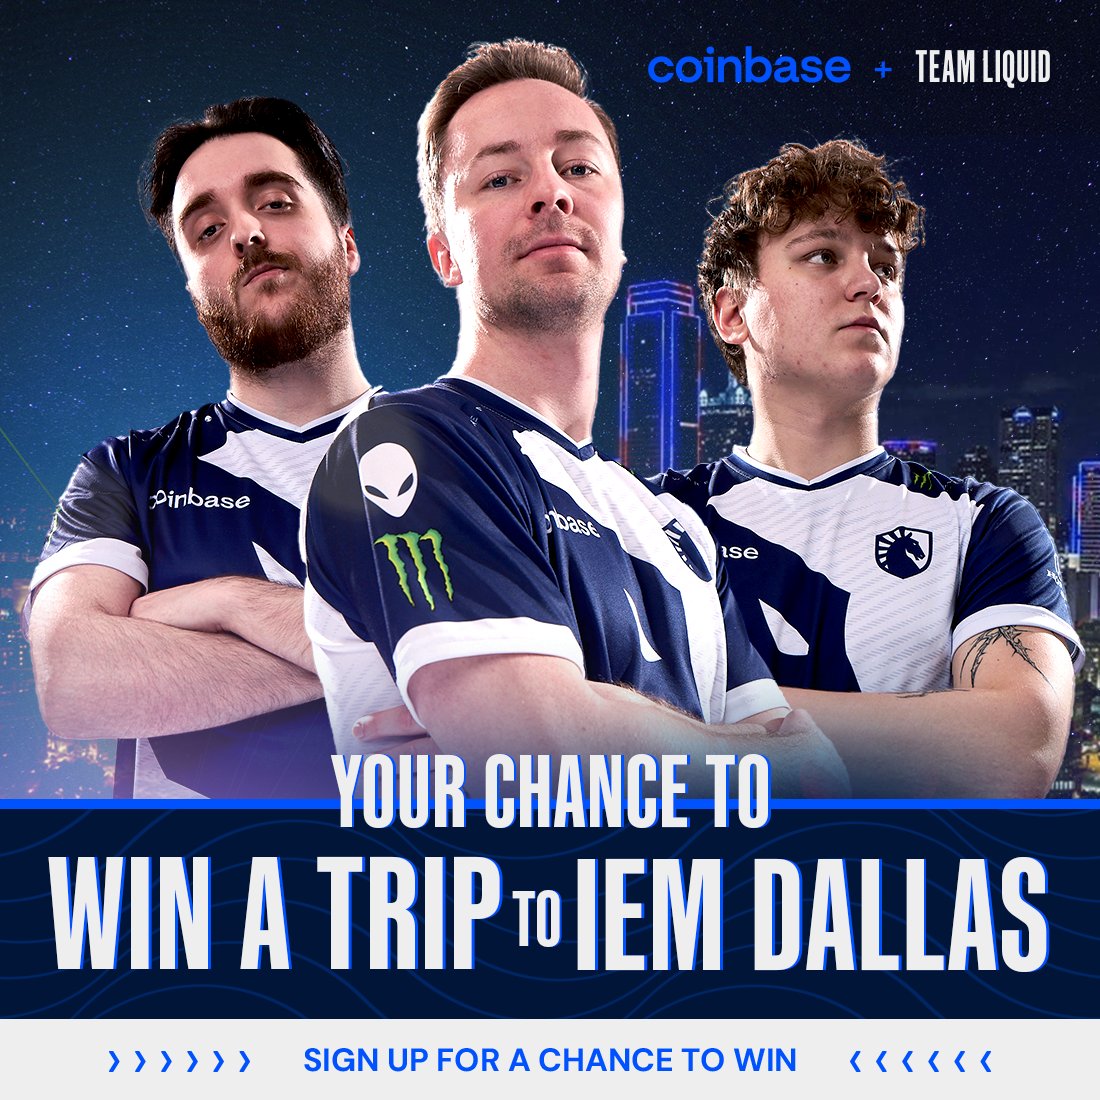 🚨 VIP SWEEPSTAKES ALERT 🚨 Enter for a chance to win a IEM Dallas VIP Package for two! You & friend will get airfare, hotel & VIP tix to watch CounterStrike, experience Dreamhack and enjoy Texas! No purch necessary, full rules & entry: ➡️ TL.GG/MAJORSWEEPS ⬅️